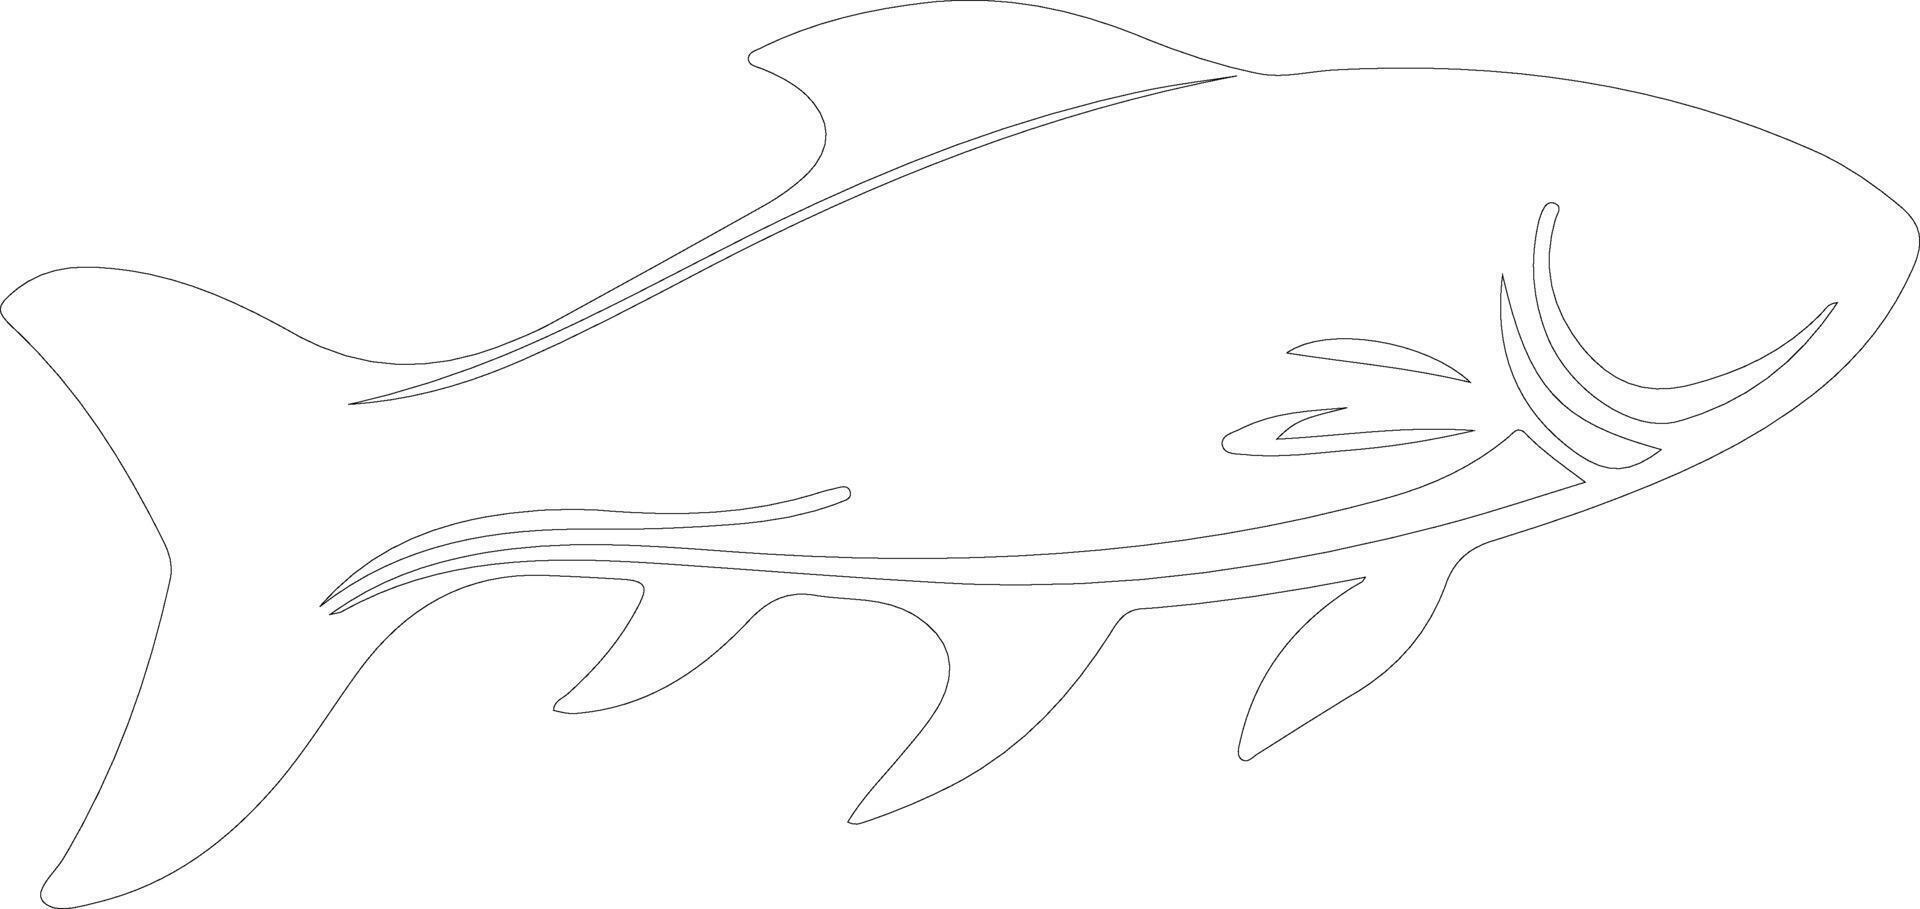 Dinichthys outline silhouette vector